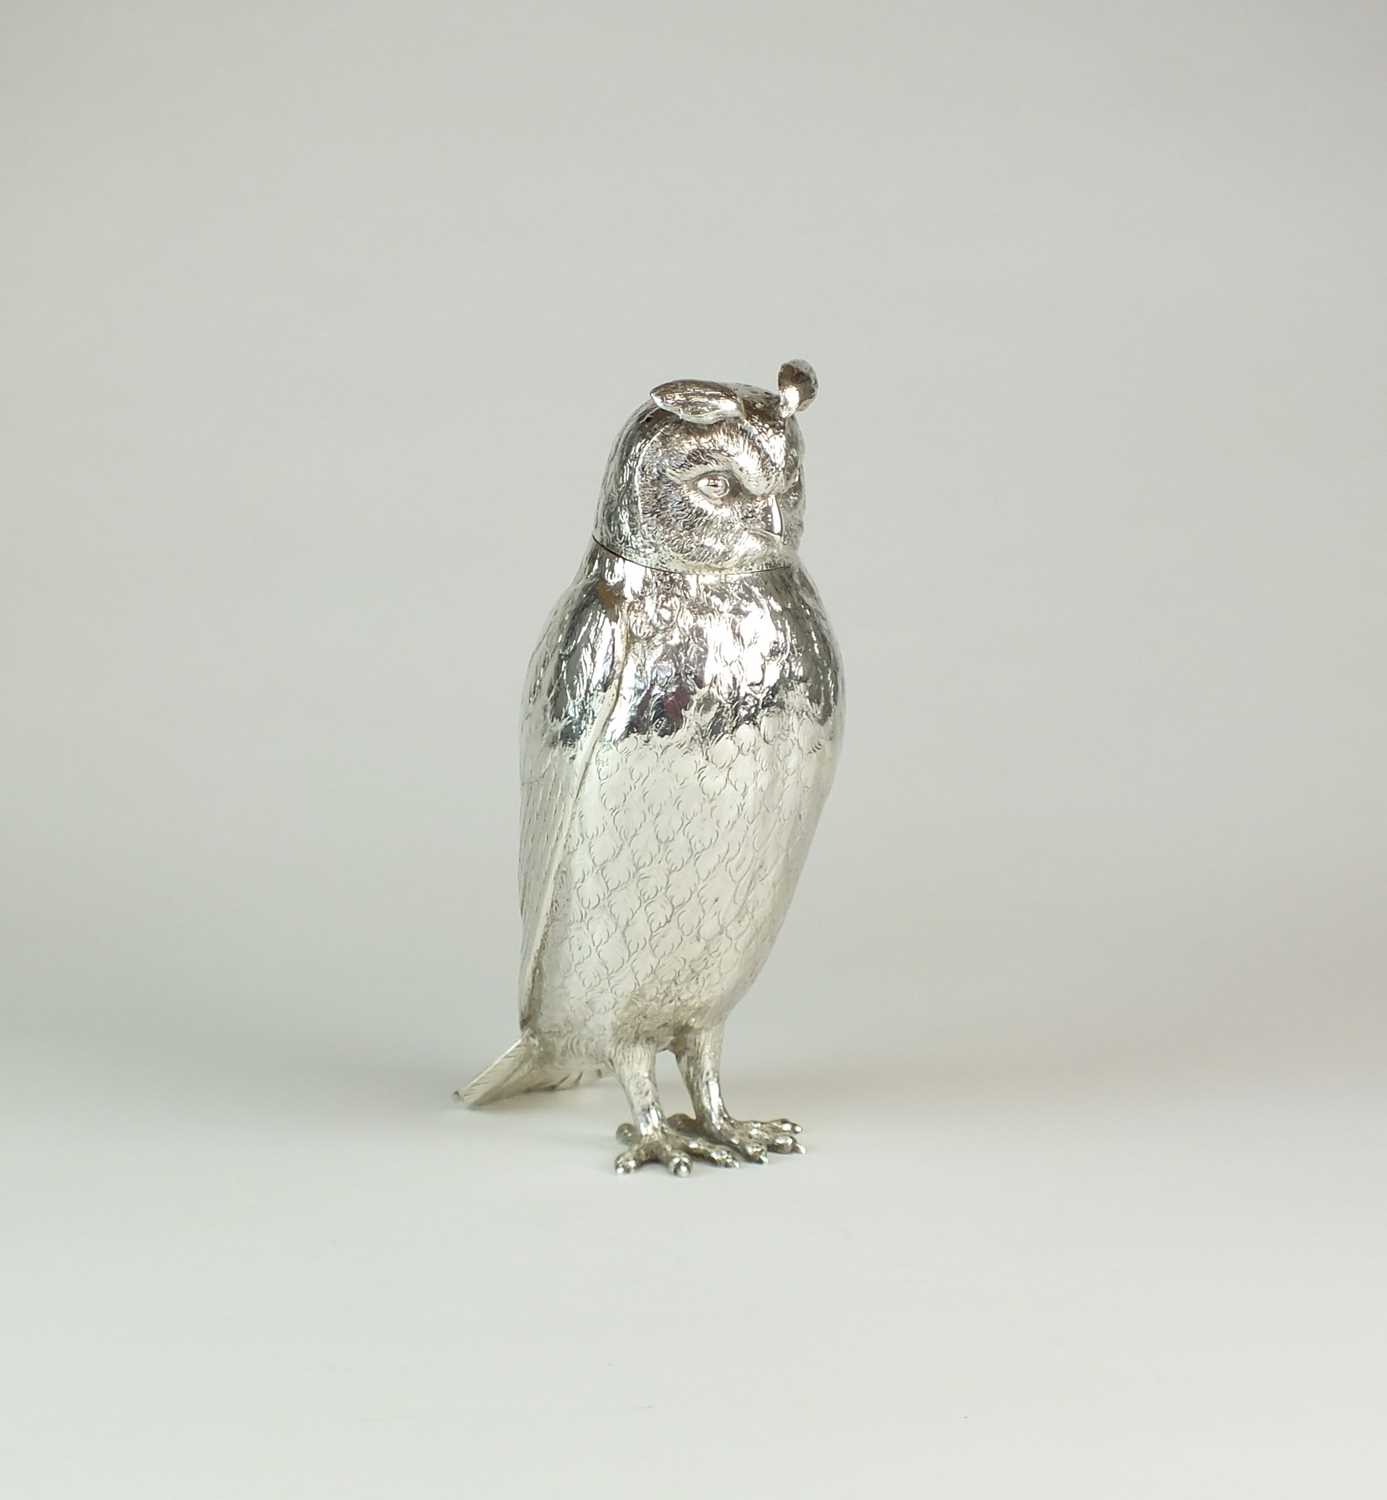 35 - An impressive Edwardian Goldsmiths and Silversmiths Co Ltd silver sugar caster in the form of an owl